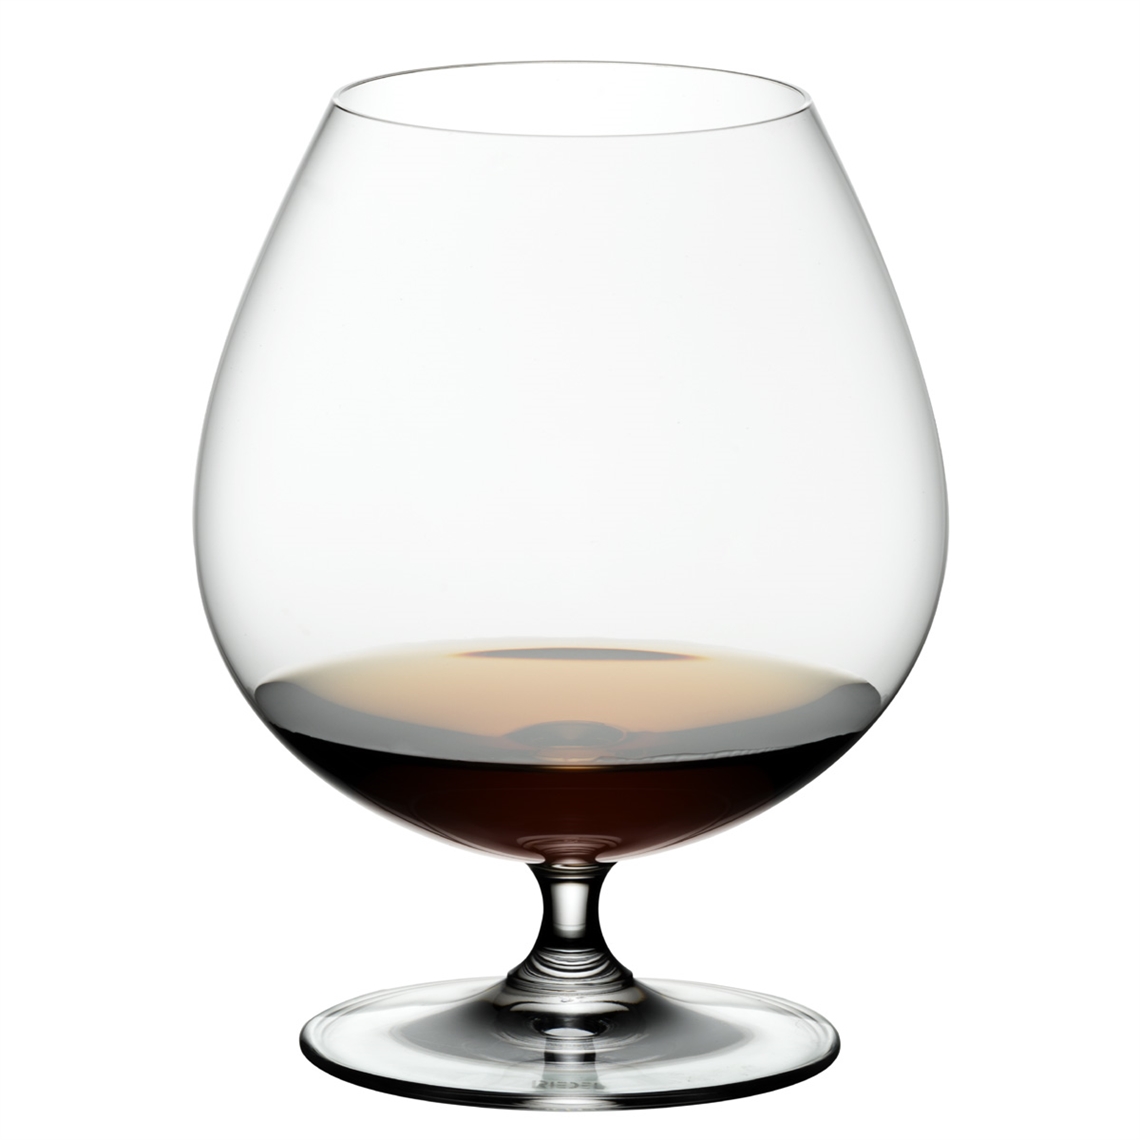 View more ivento from our Spirit Glasses range